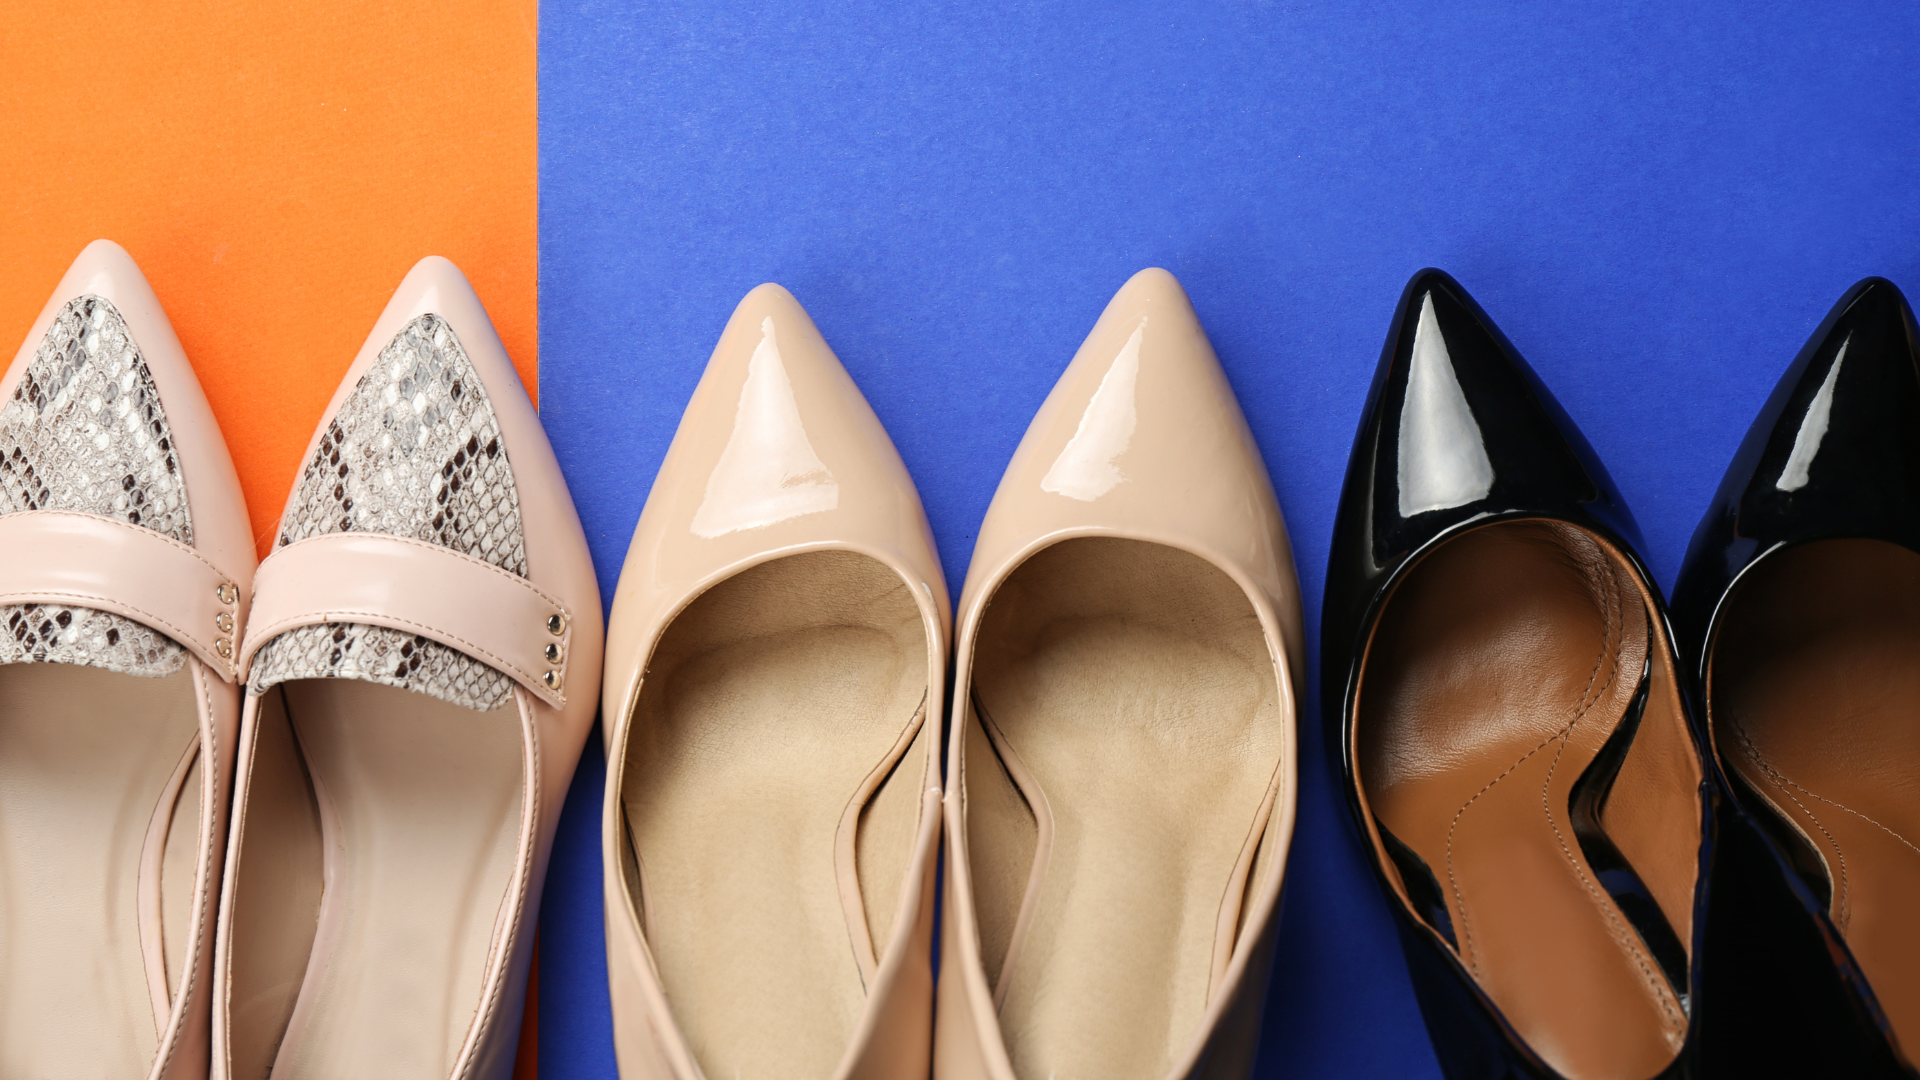 three different pairs of female shoes on a orange-blue backround